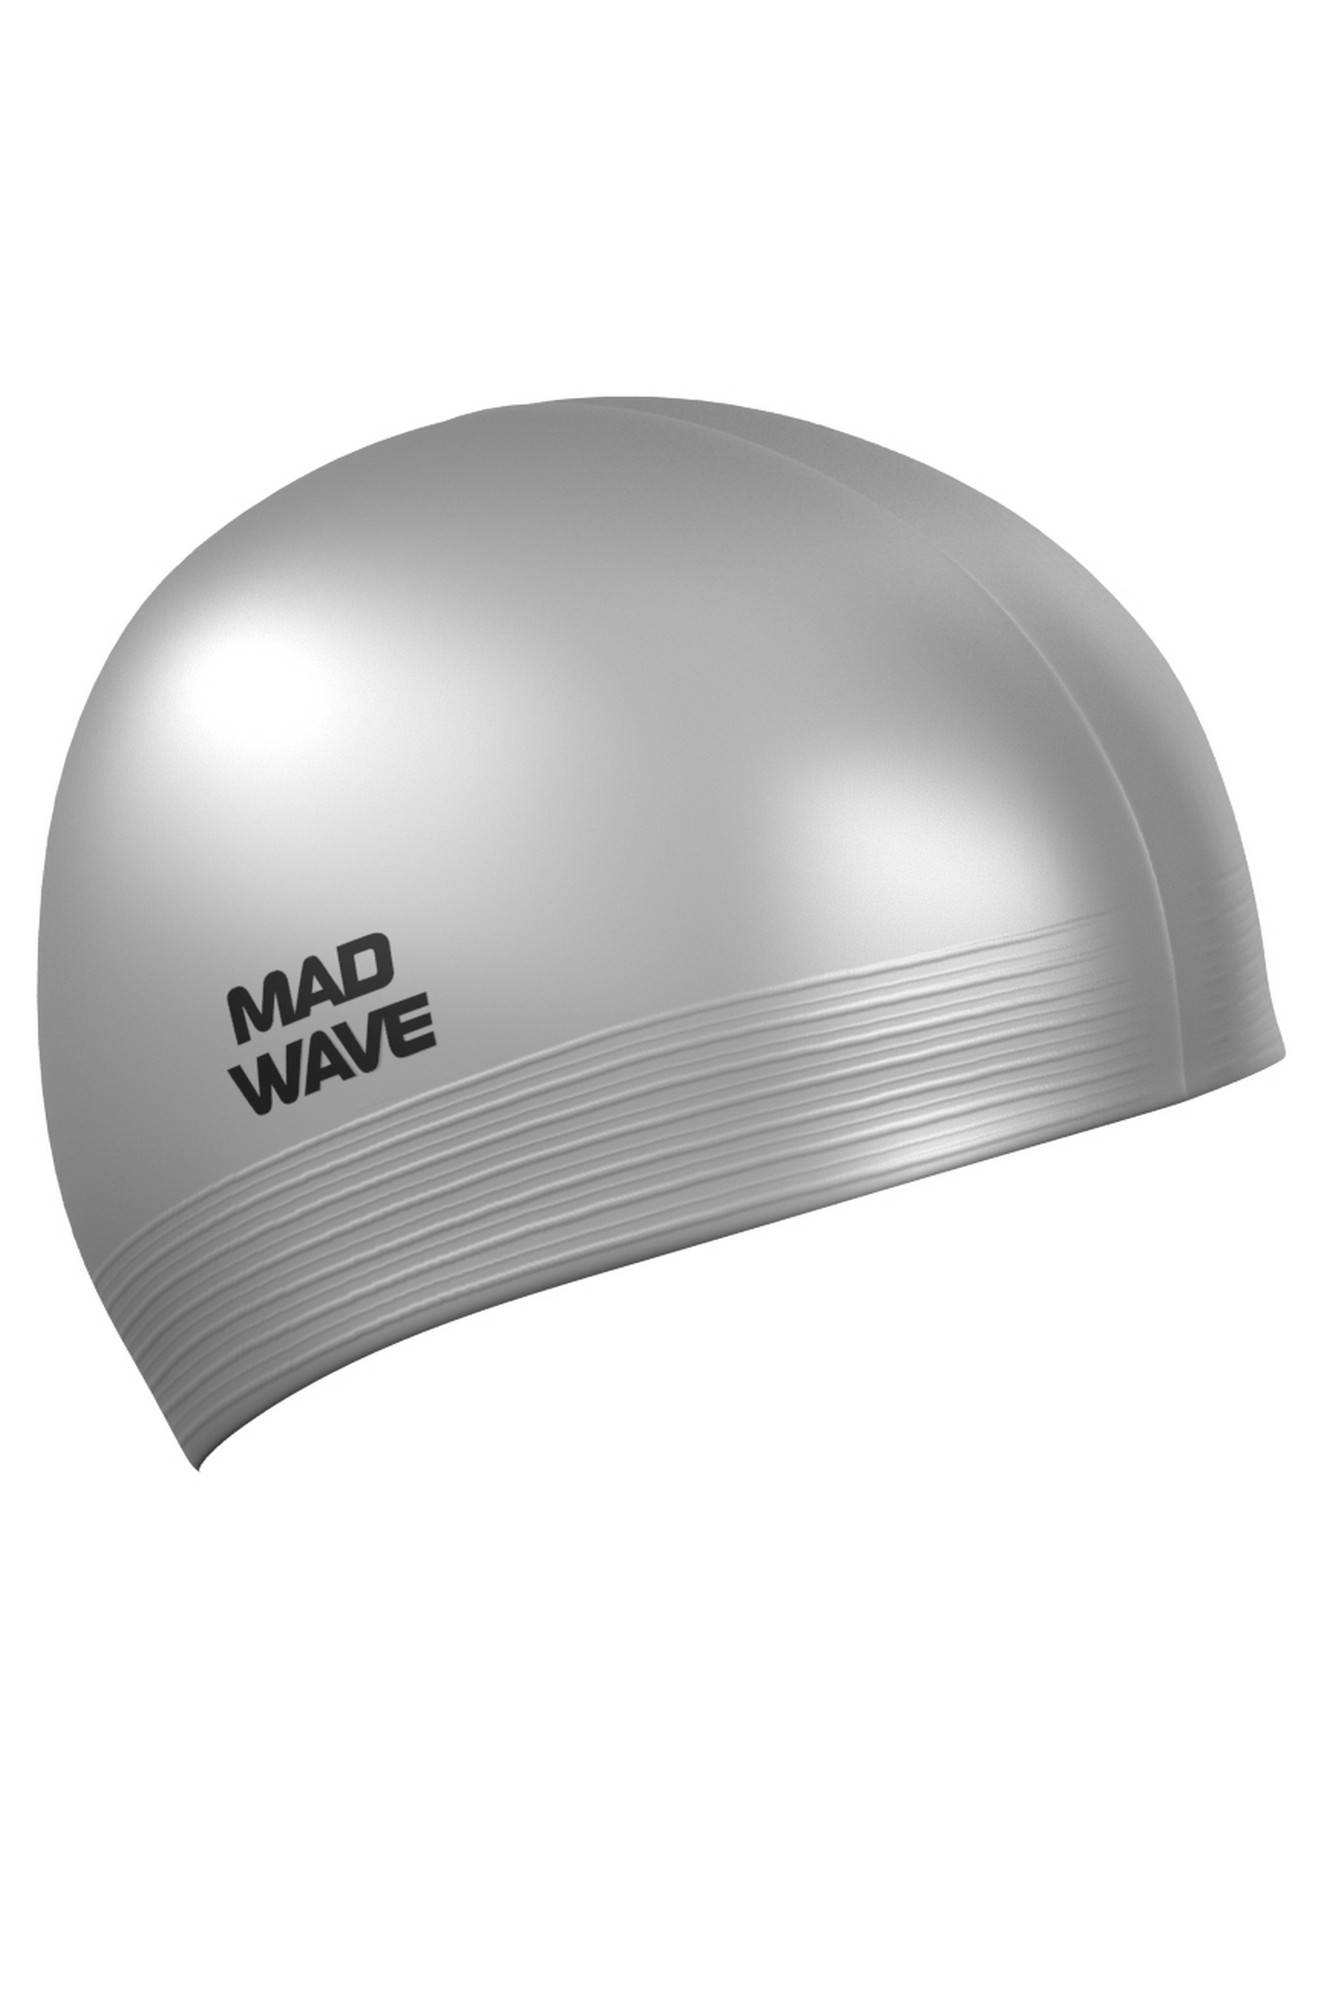   Mad Wave Solid Soft M0565 02 0 17W 